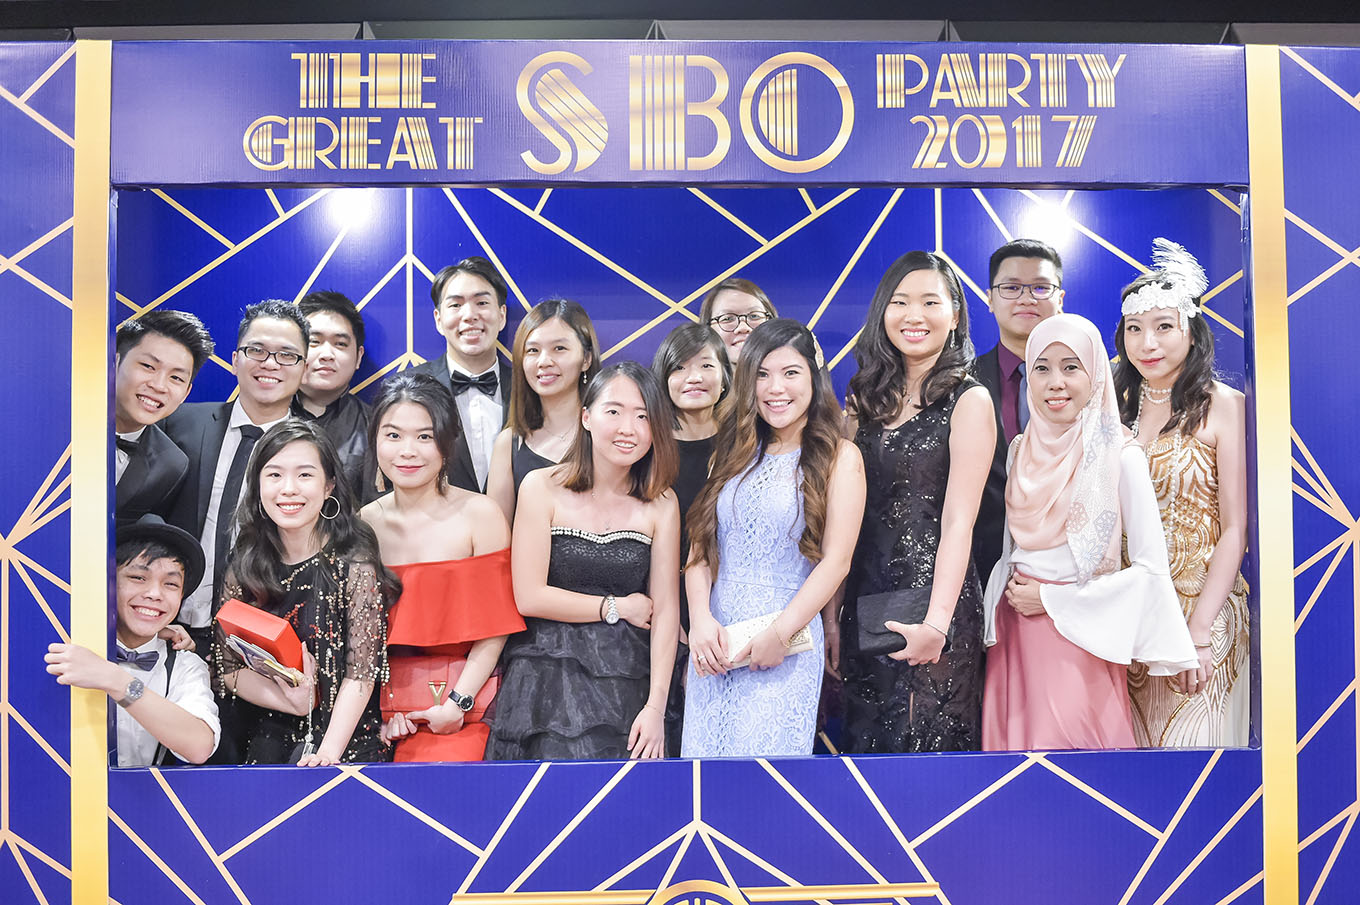 Define International - The Great SBO Party 2017